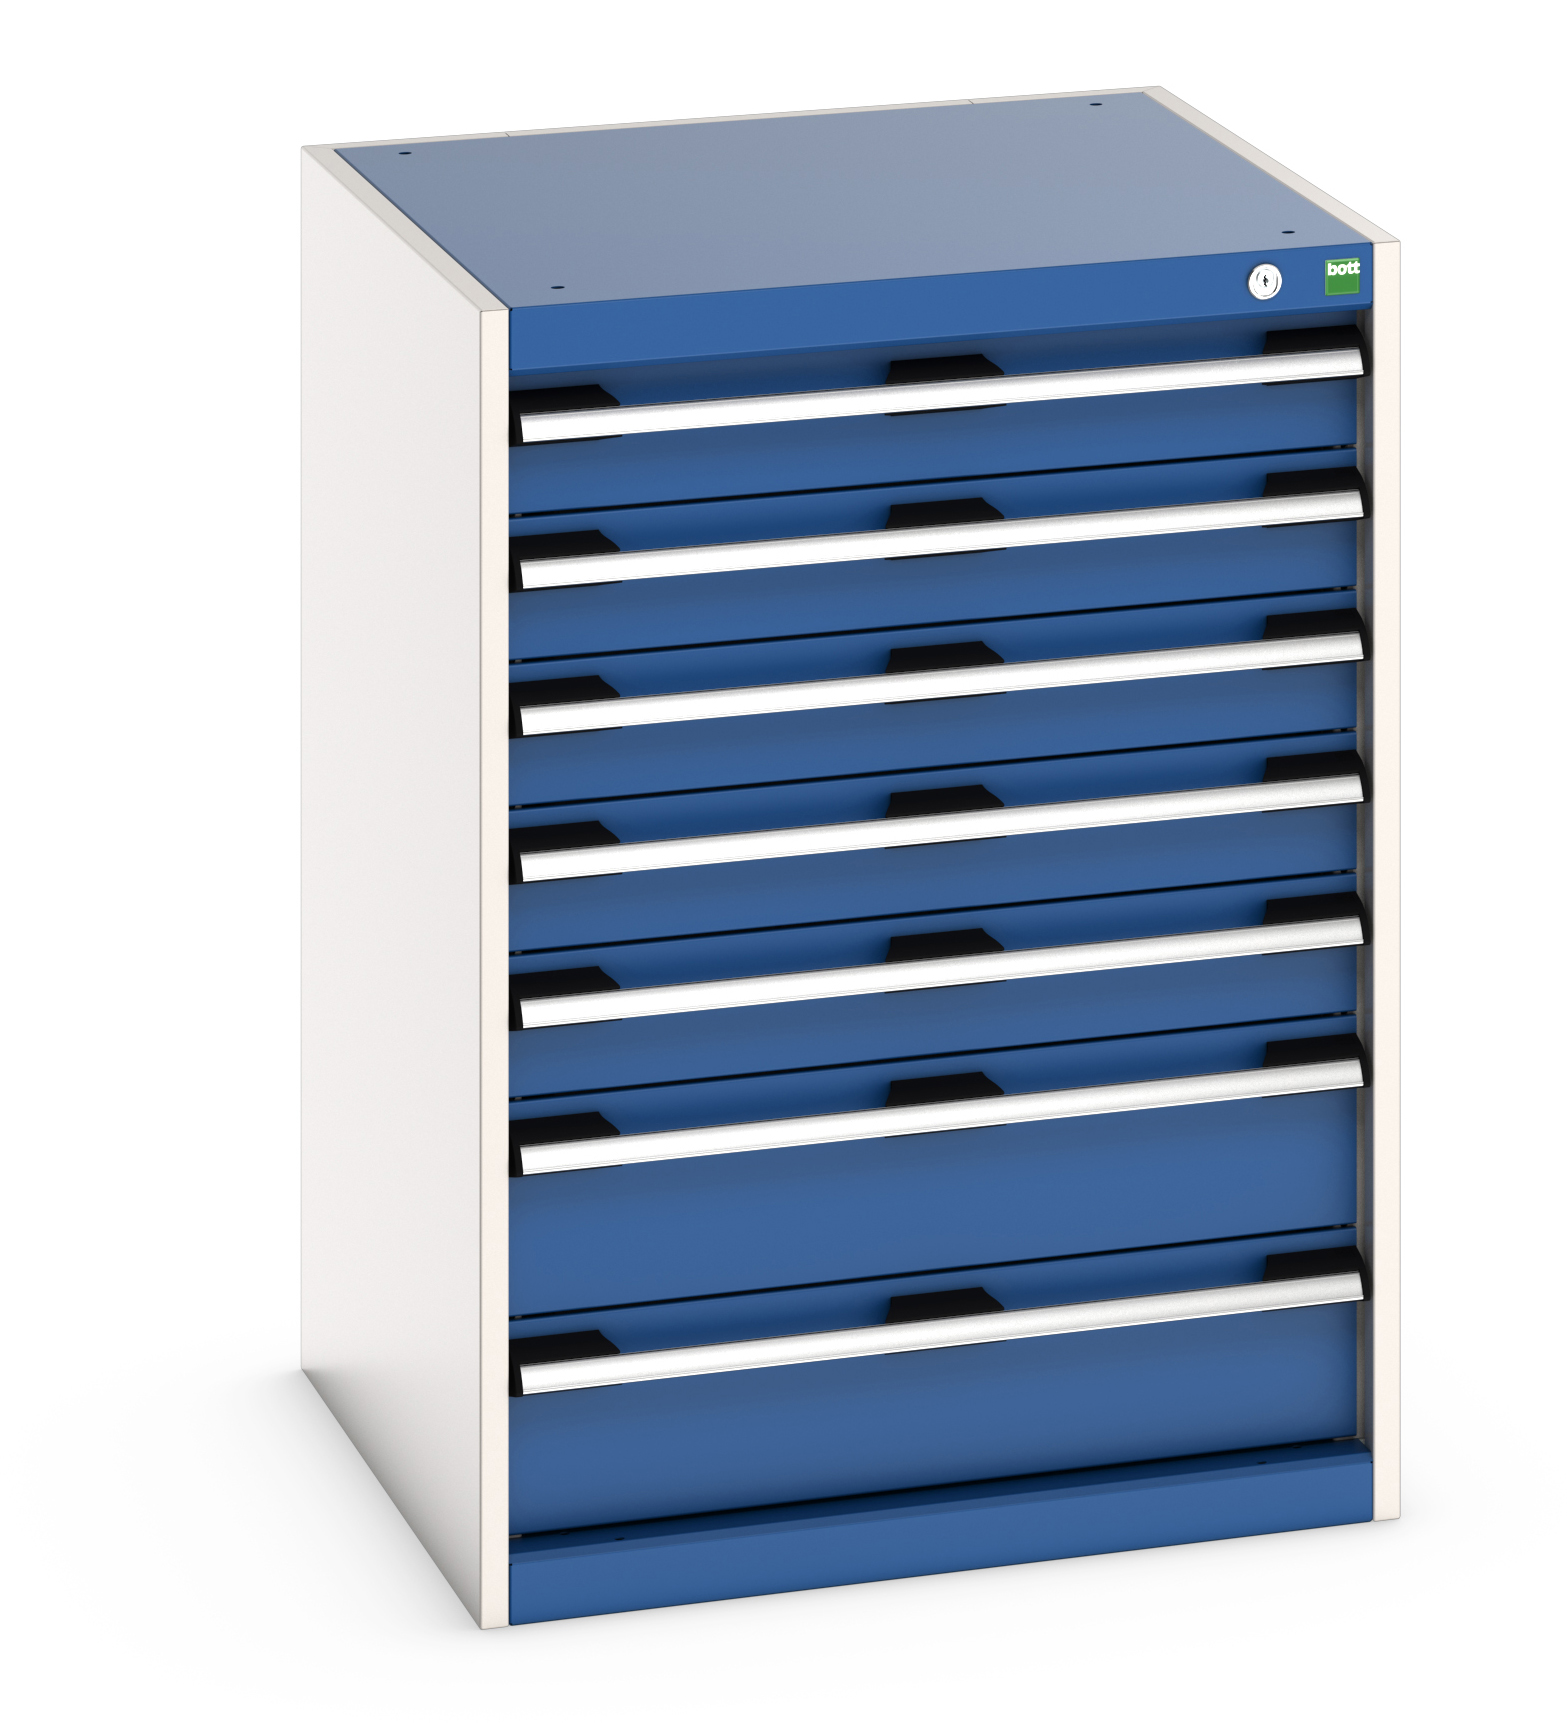 Bott Cubio Drawer Cabinet With 7 Drawers - 40019051.11V